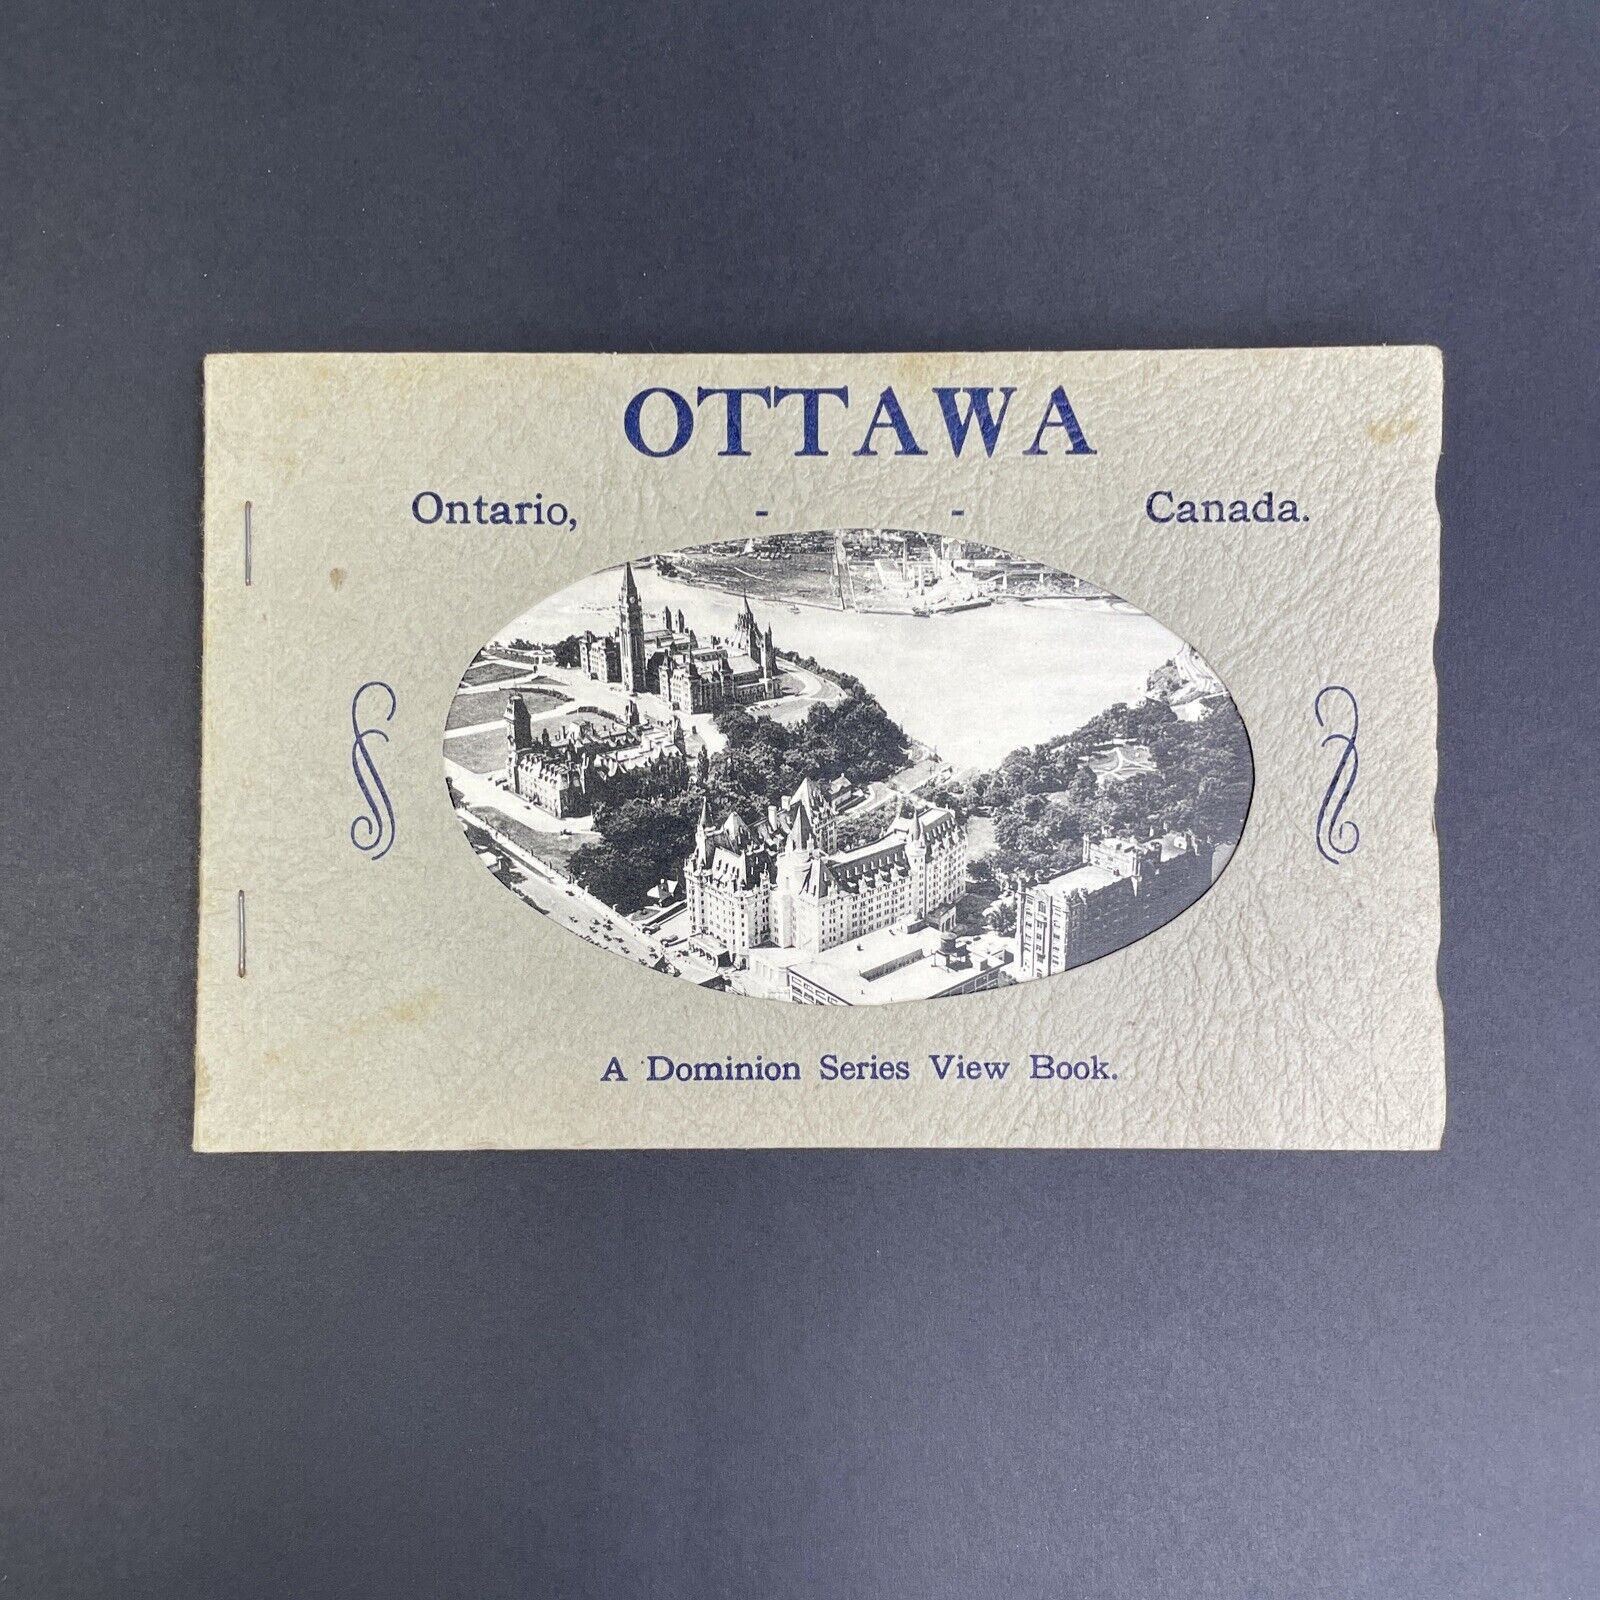 Antique 1930s Ottawa Ontario Photo Booklet Canada Royal Canadian Mint Parliament